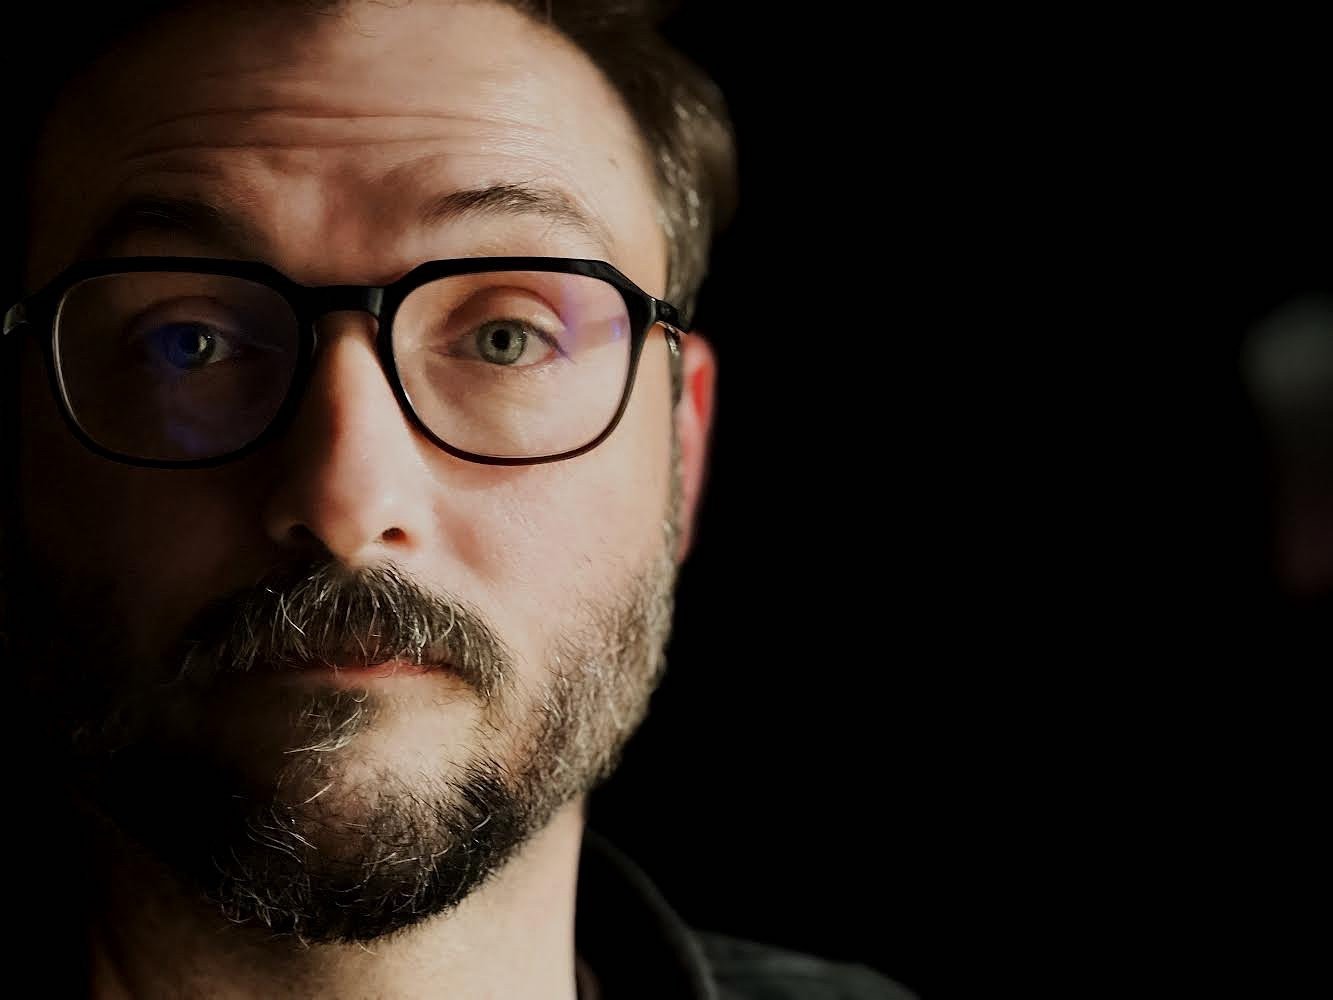 Caleb Curtiss, a white man with a beard and black glasses, stares at the camera, unsmiling. The photo is a close-up so that only his face is visible against a solid black background